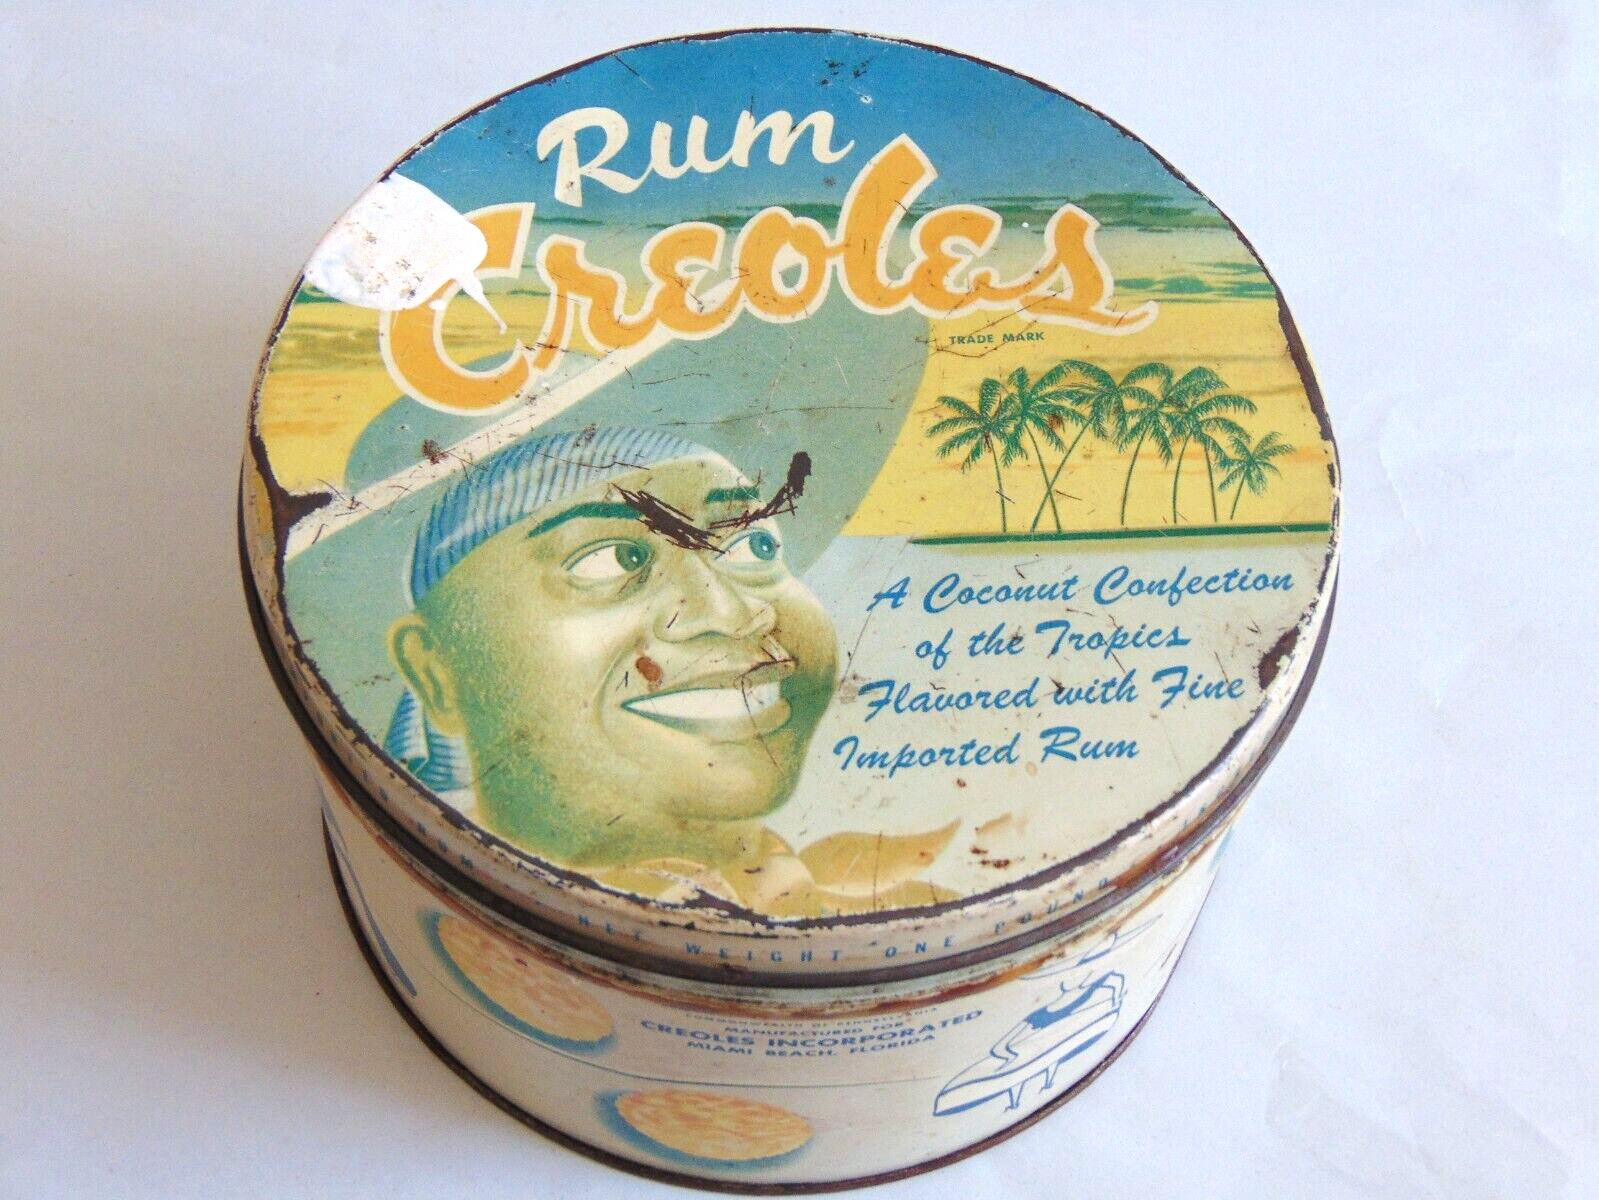 Rum Creoles Coconut Confection of the Tropics Round Tin Can Antique Well Worn